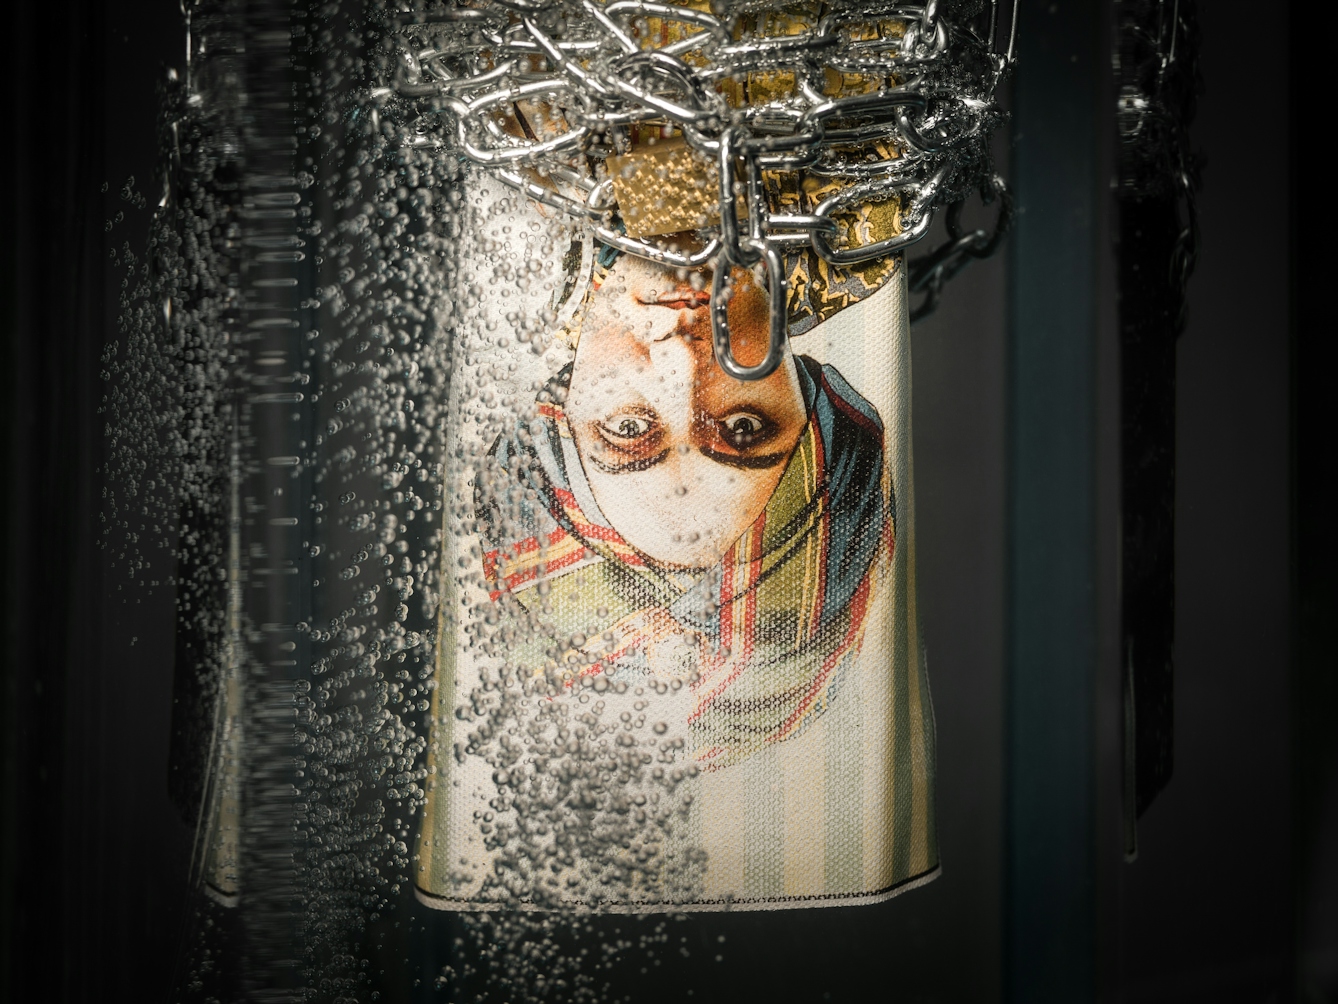 Photograph of a promotional poster for the 1920s mind reader, Alexander, hanging upside down in a tank of water wrapped in chains and padlocks, surrounded by bubbles.